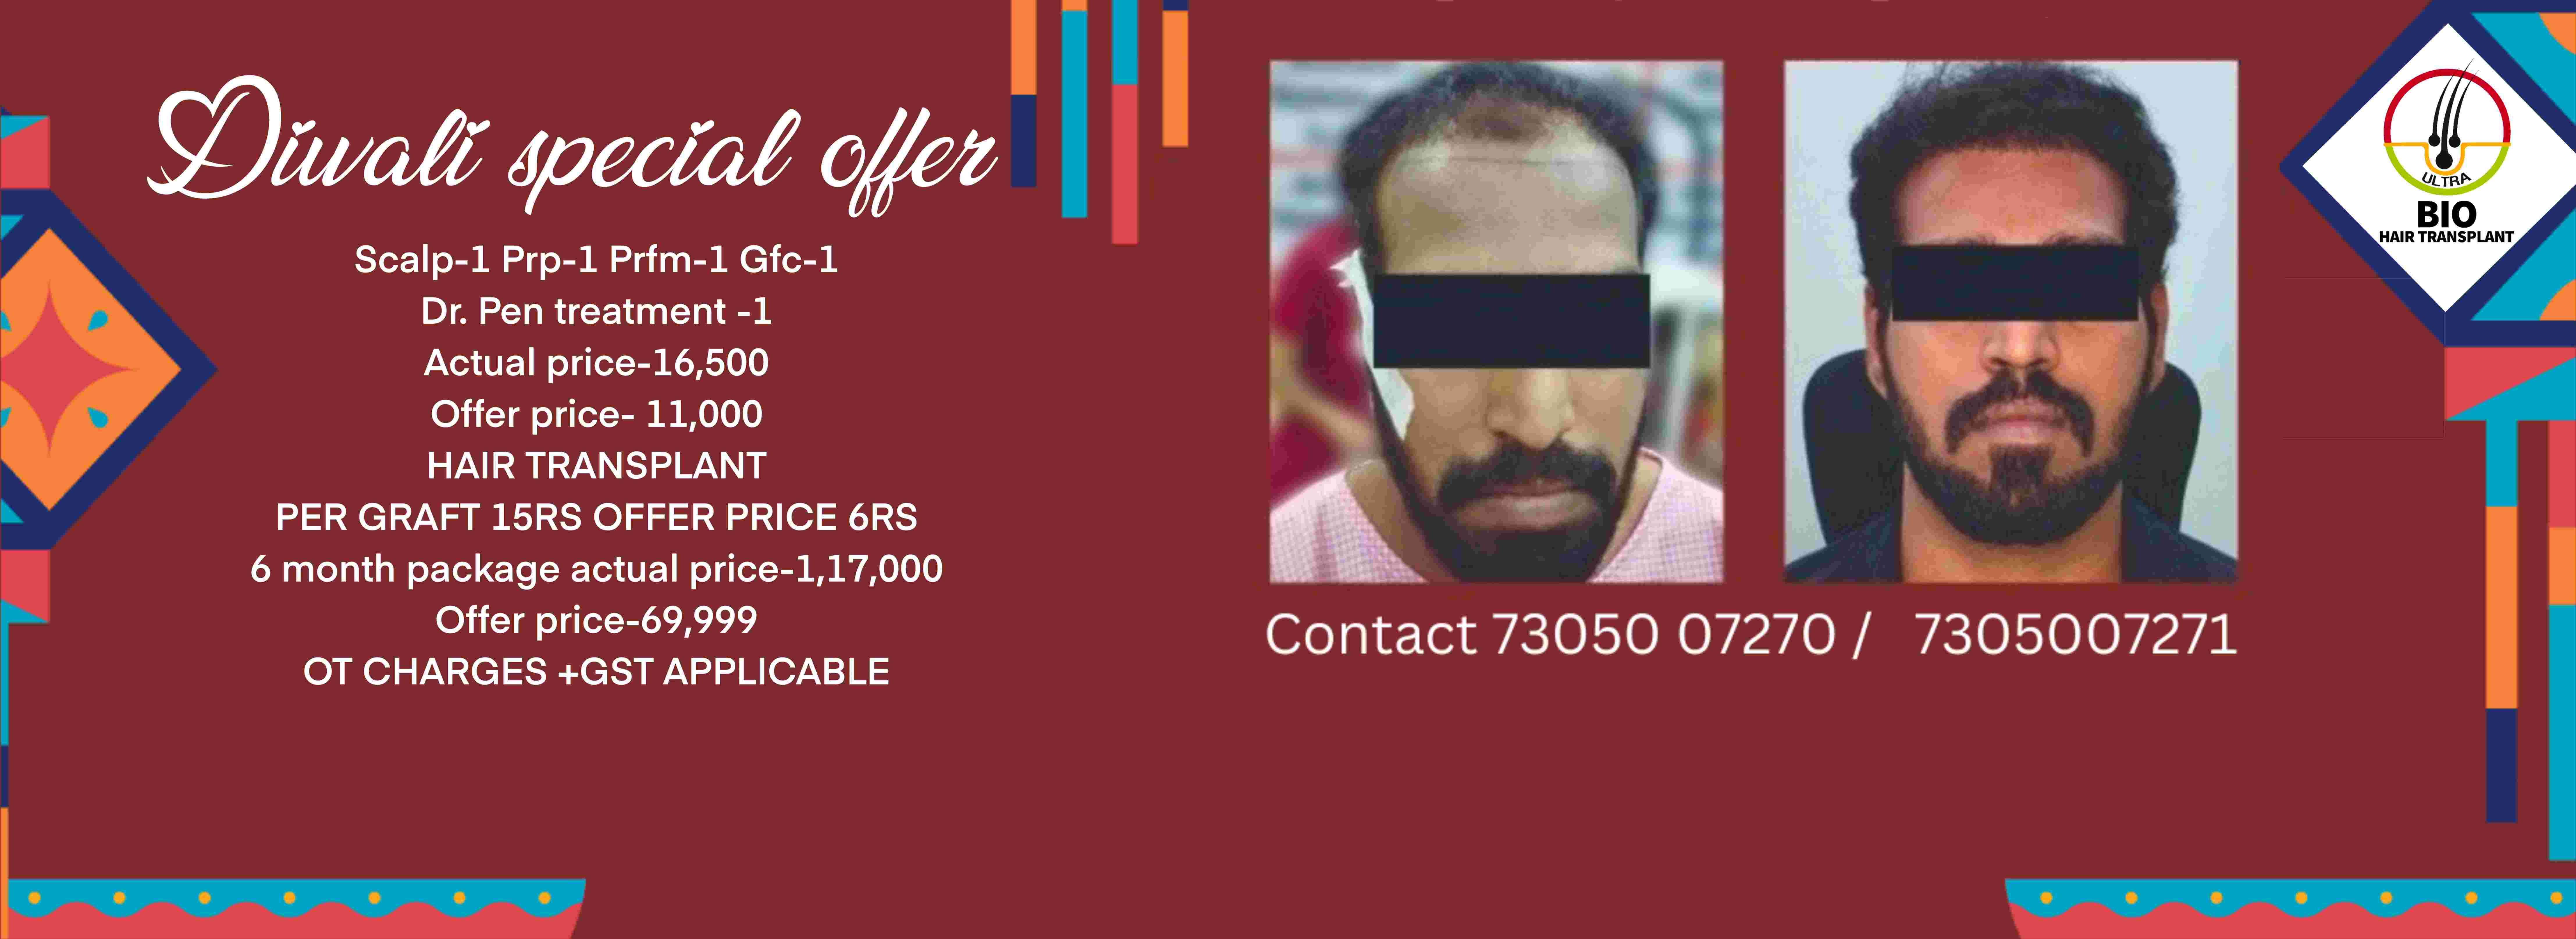 Check with client. Still we need this?
Diwali special offer hair transplant treatment
